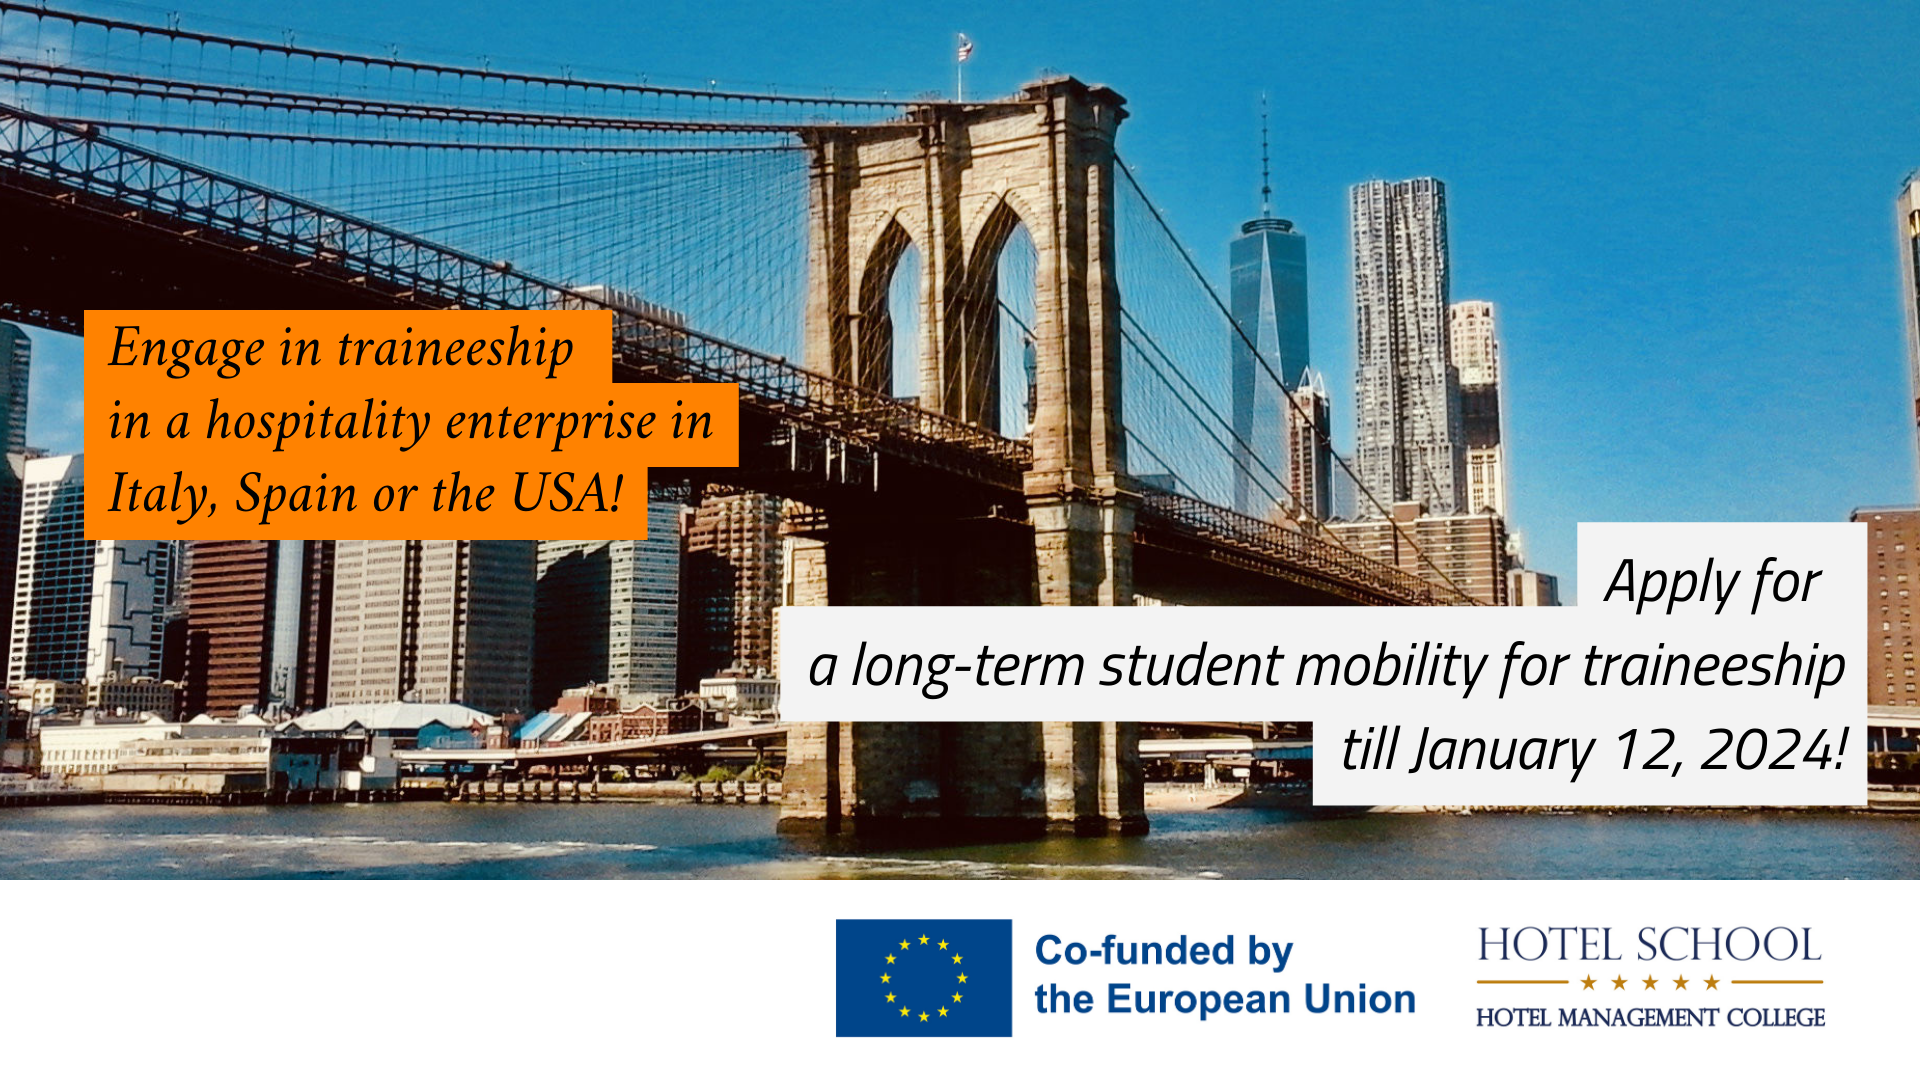 Erasmus Higher Education Student Mobility for Traineeships Call-1 (No. 2023-1-LV01-KA131-HED-000136703)